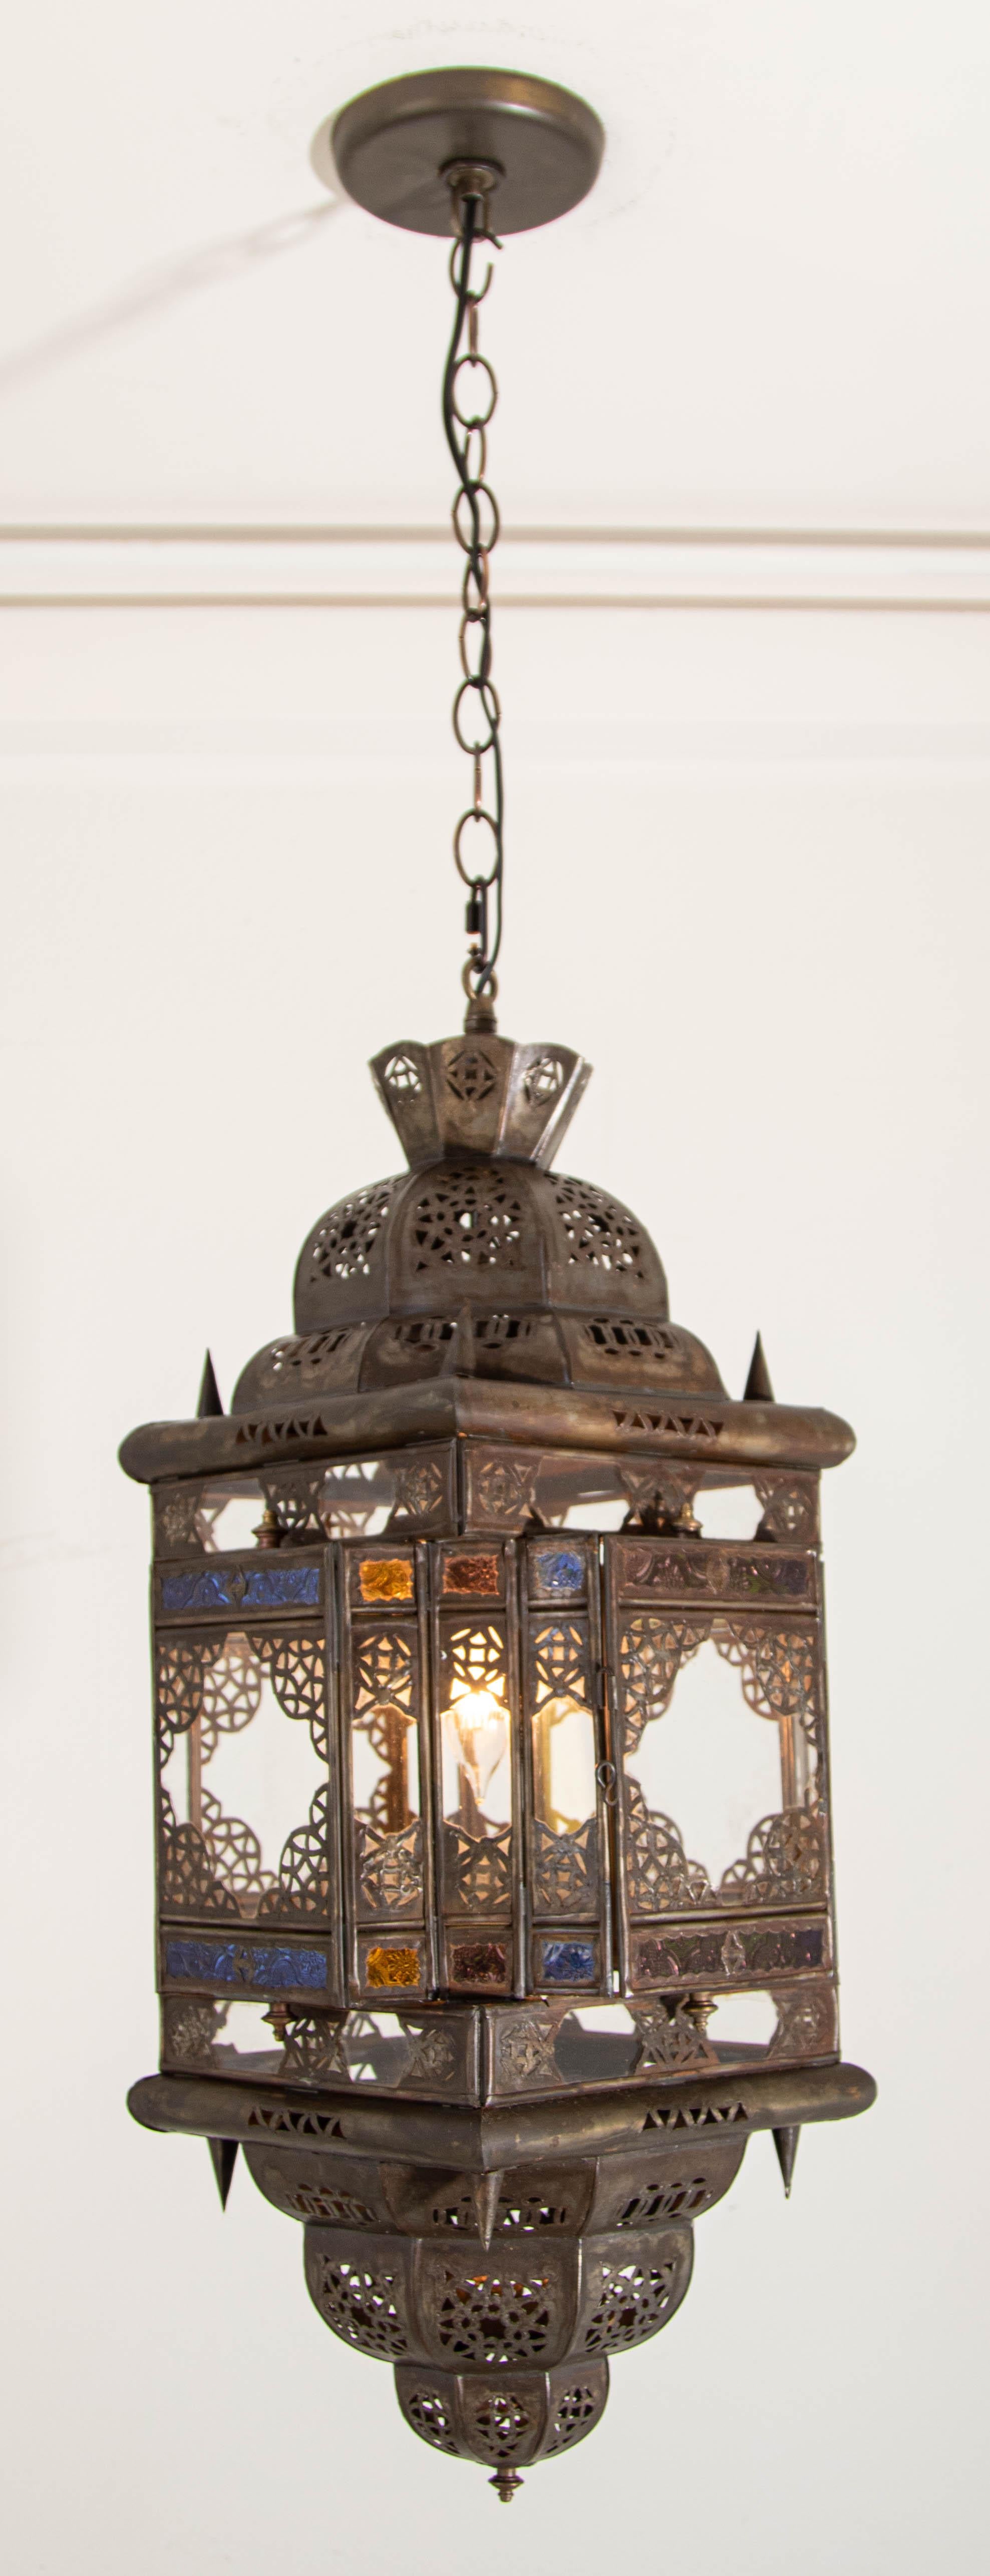 Vintage Moroccan Hanging Lantern Clear and Multicolor Glass Made in Marrakech
Clear and multicolor glass in square shape lantern pendant handcrafted by Moroccan skilled artisans in Marrakech.
The metal is hand-cut in floral and geometric Moorish